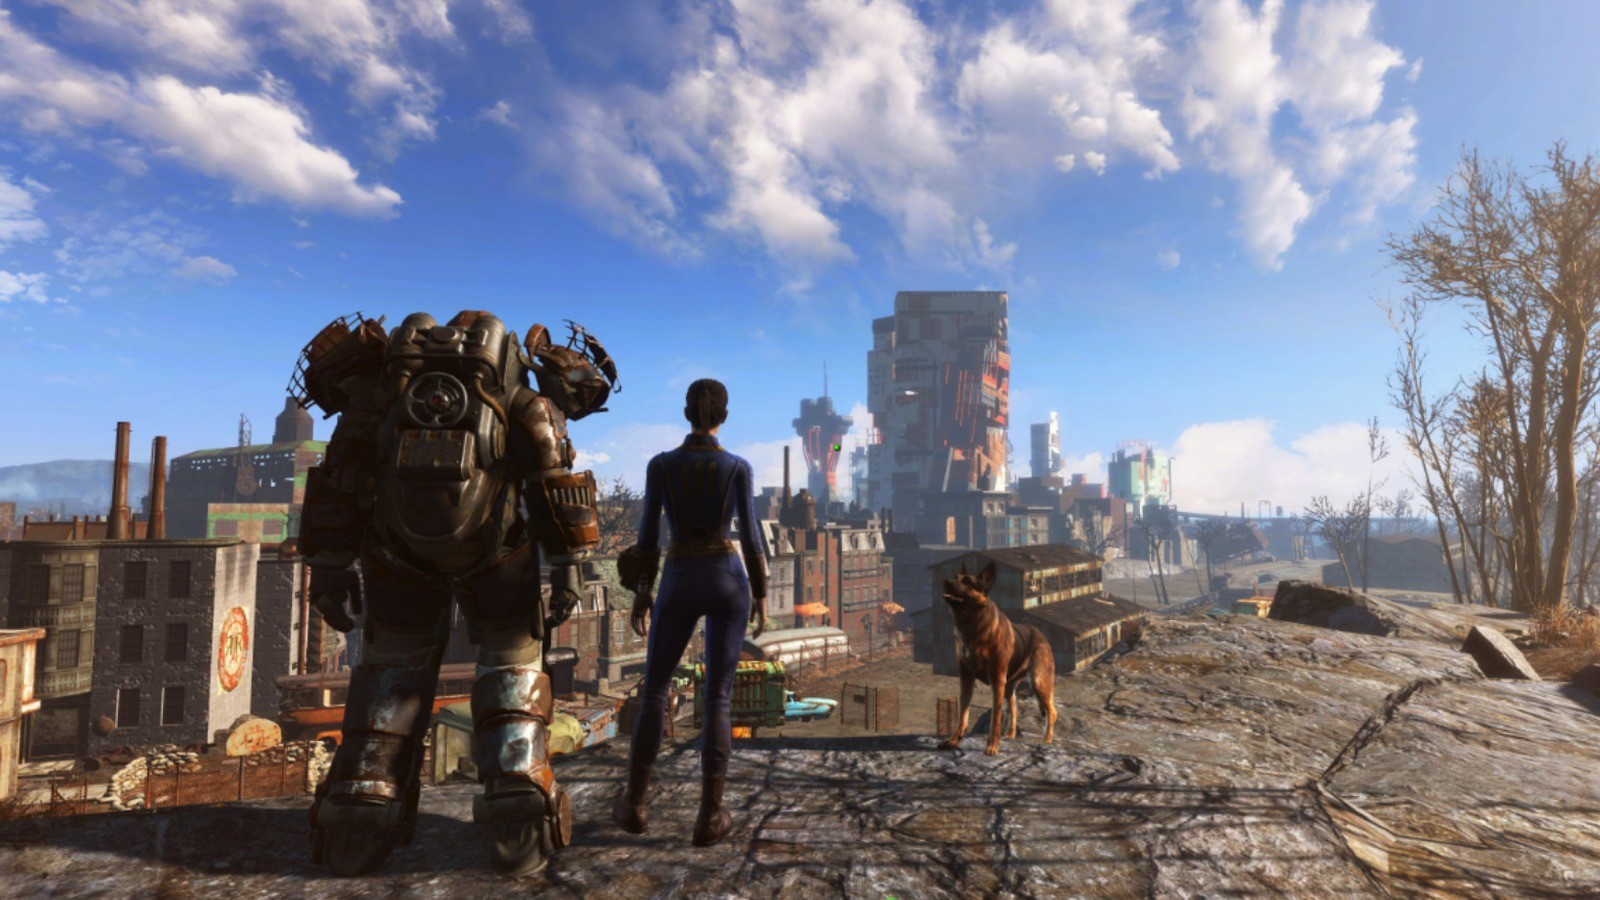 A still showing the world of Fallout. Image credit: Bethesda